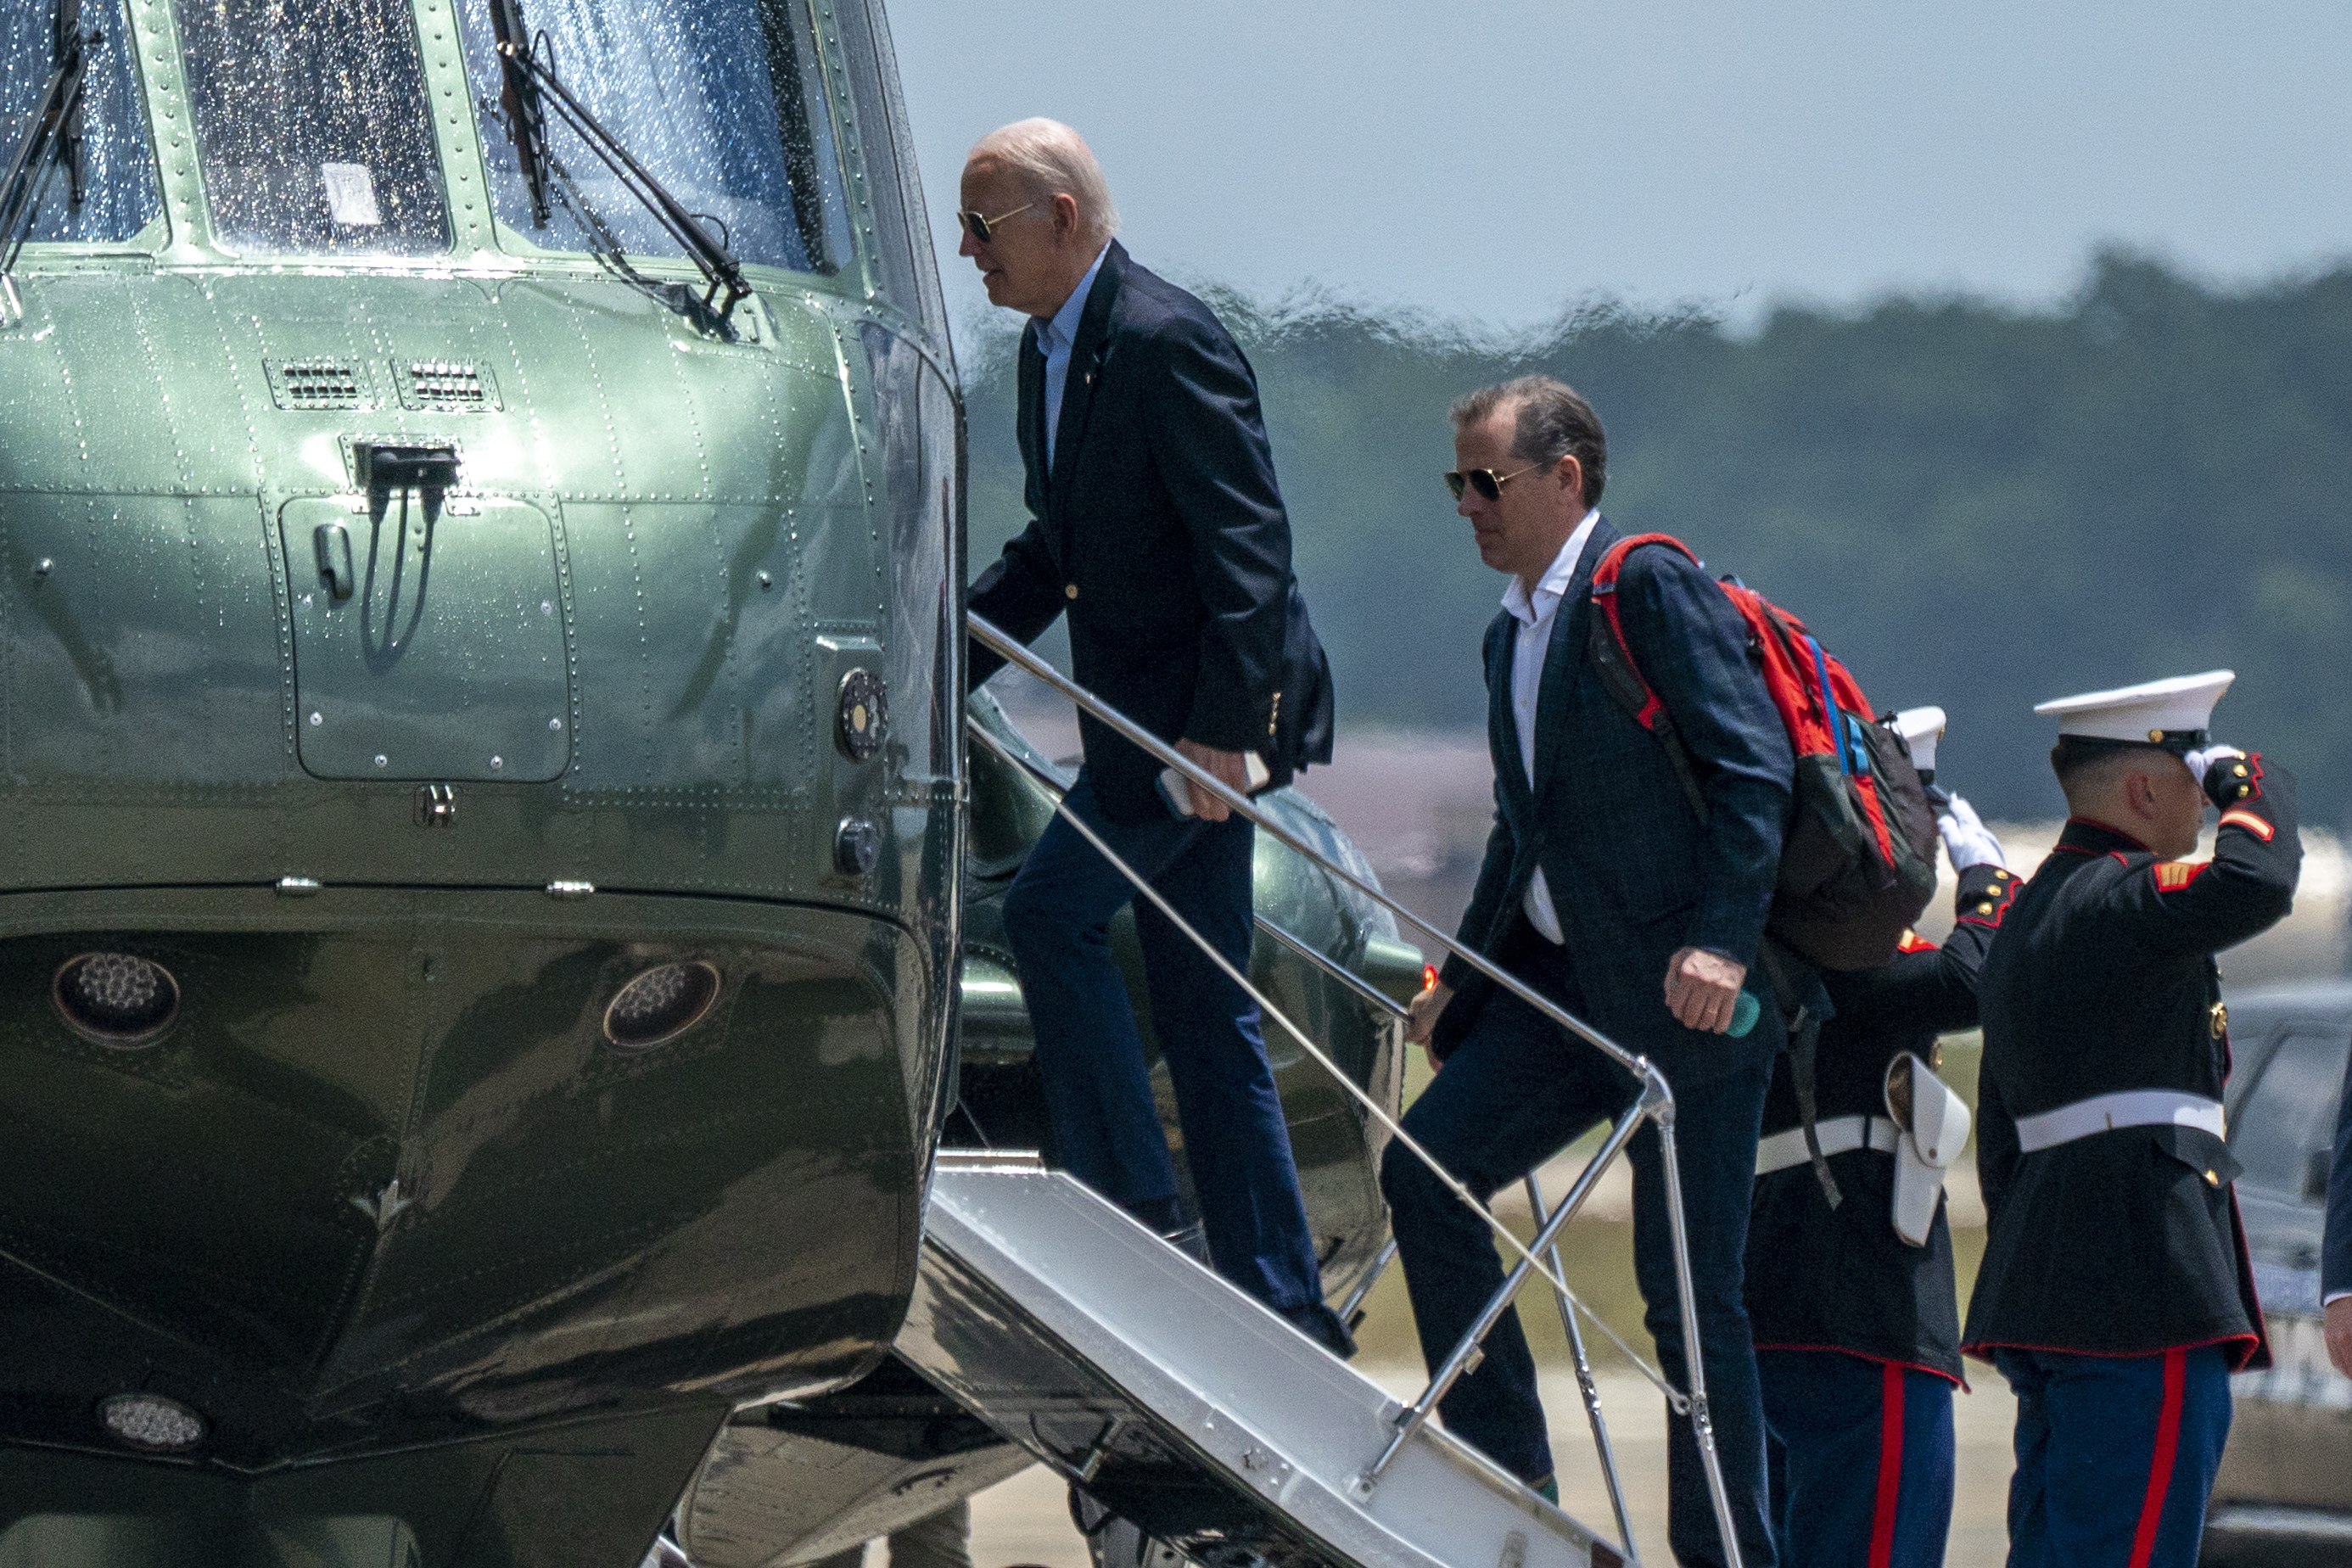 US President Joe Biden, left, and his son Hunter boarding Marine One at Joint Base Andrews, Maryland, on Saturday. Biden was briefed on the situation in Russia. Photo: EPA-EFE